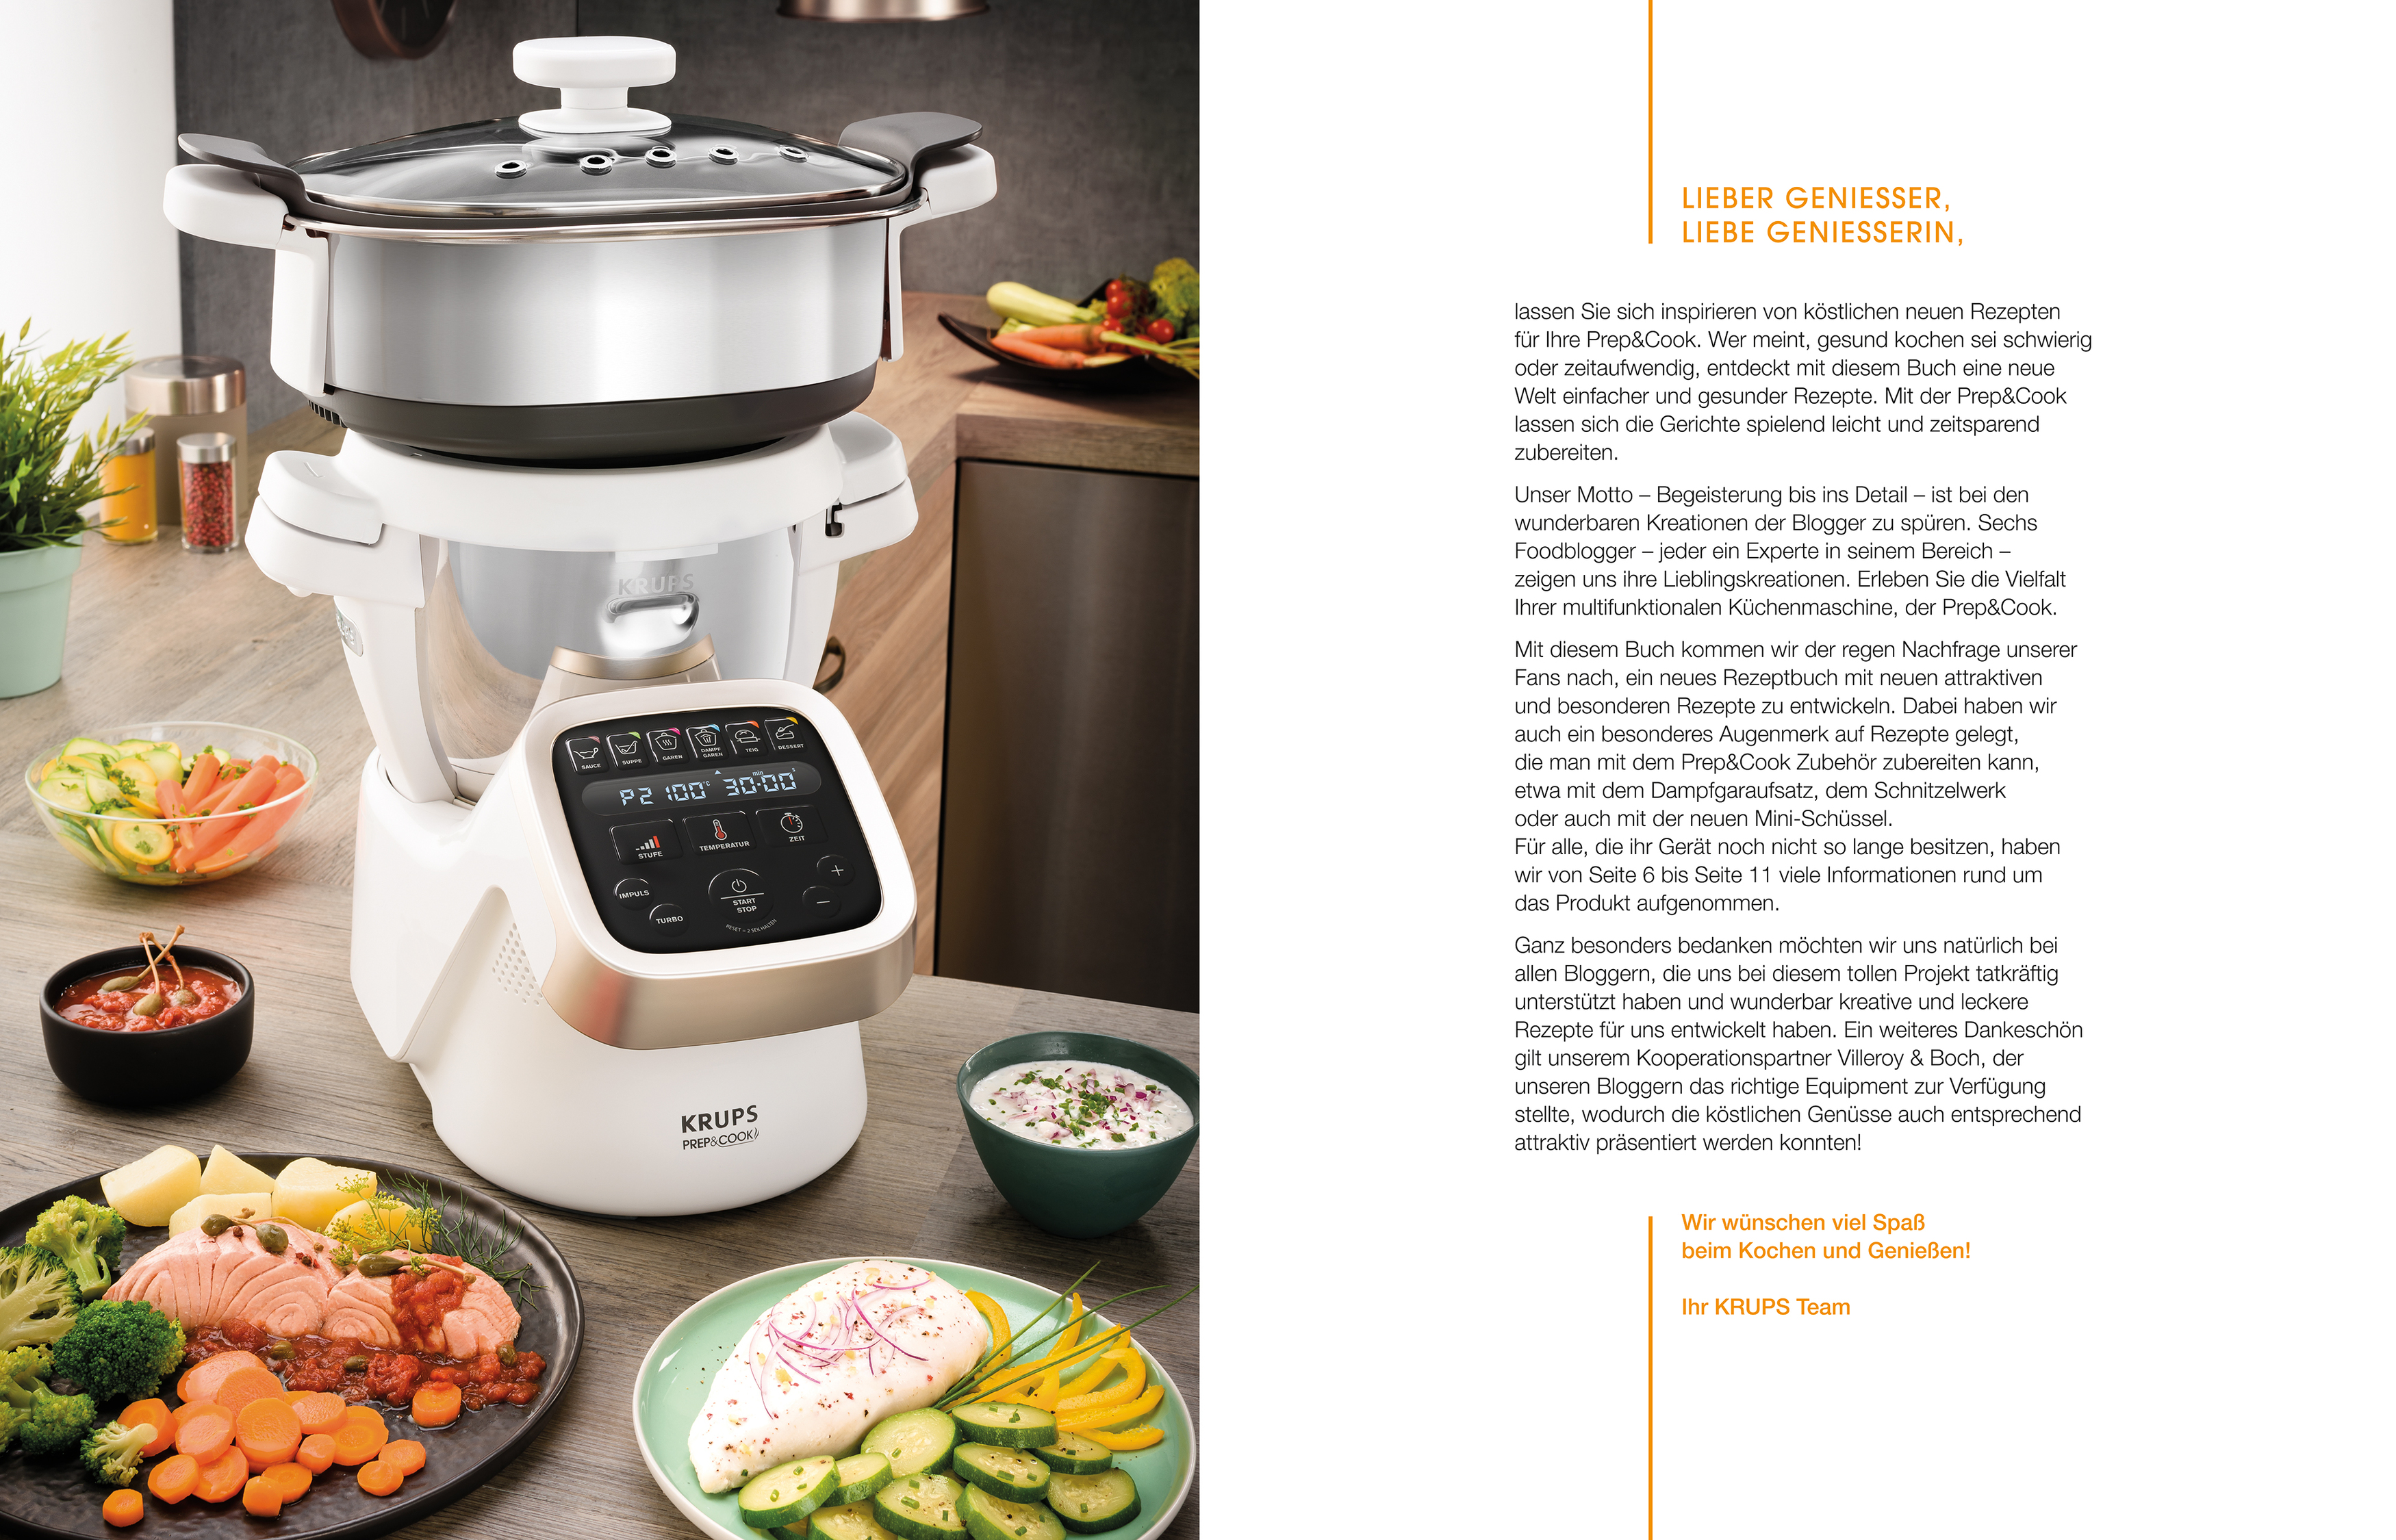 KRUPS HP1234.01 Kochbuch Healthy Cooking Prepping, Prep&Cook Easy Blogger